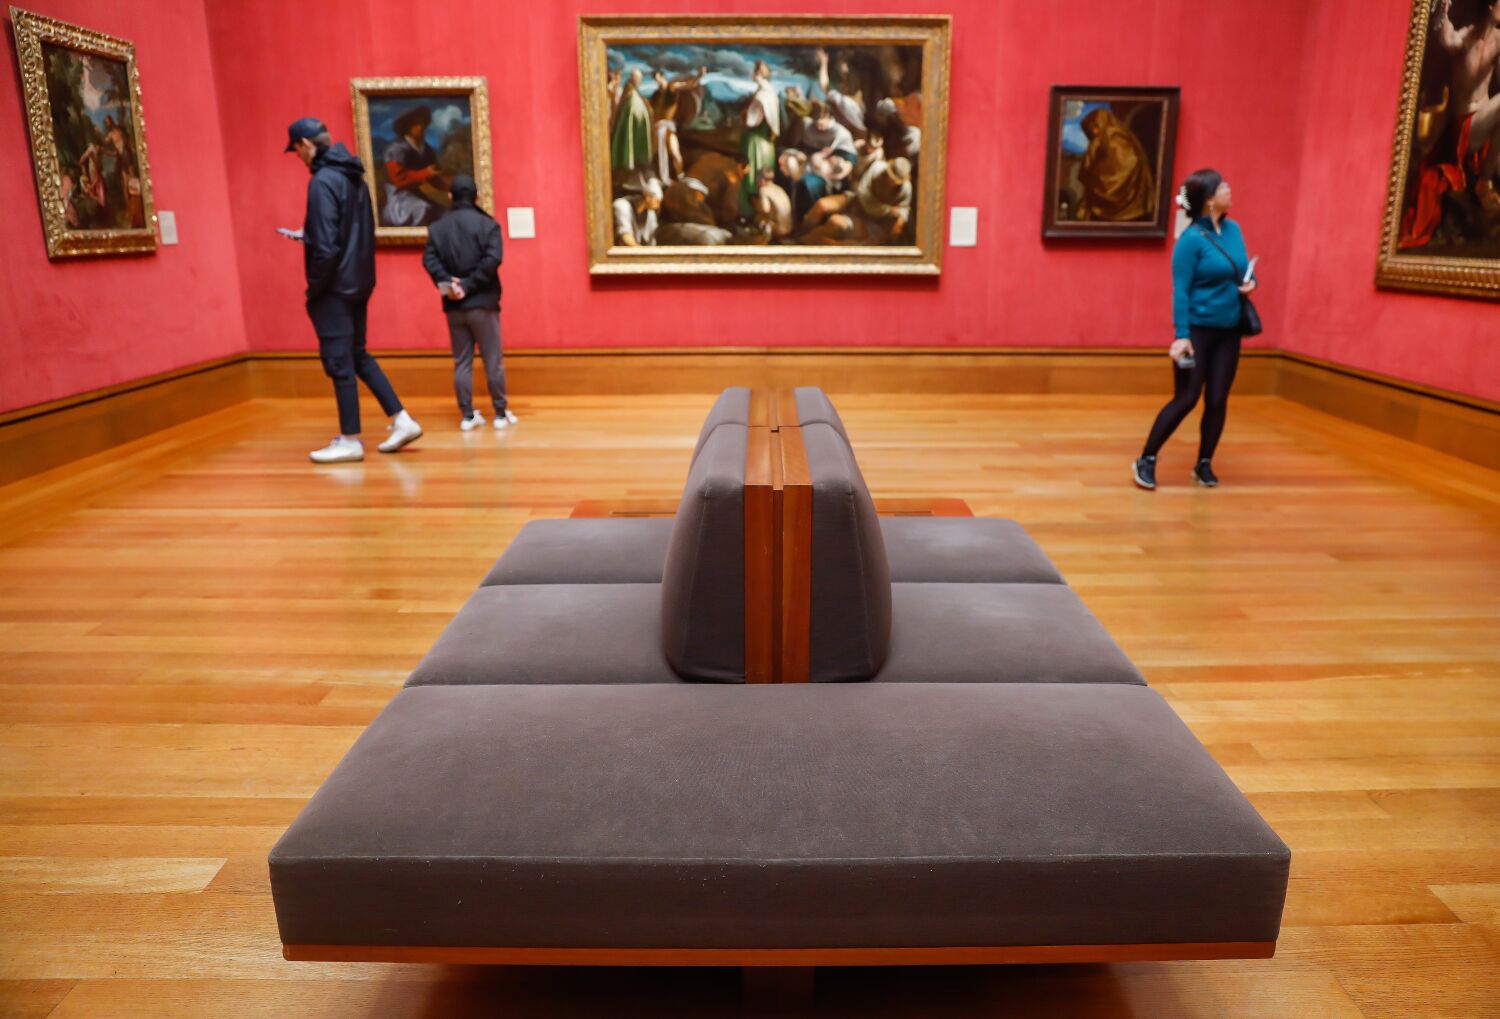 The Getty has comfy benches, but food and drink in the galleries won't sit well